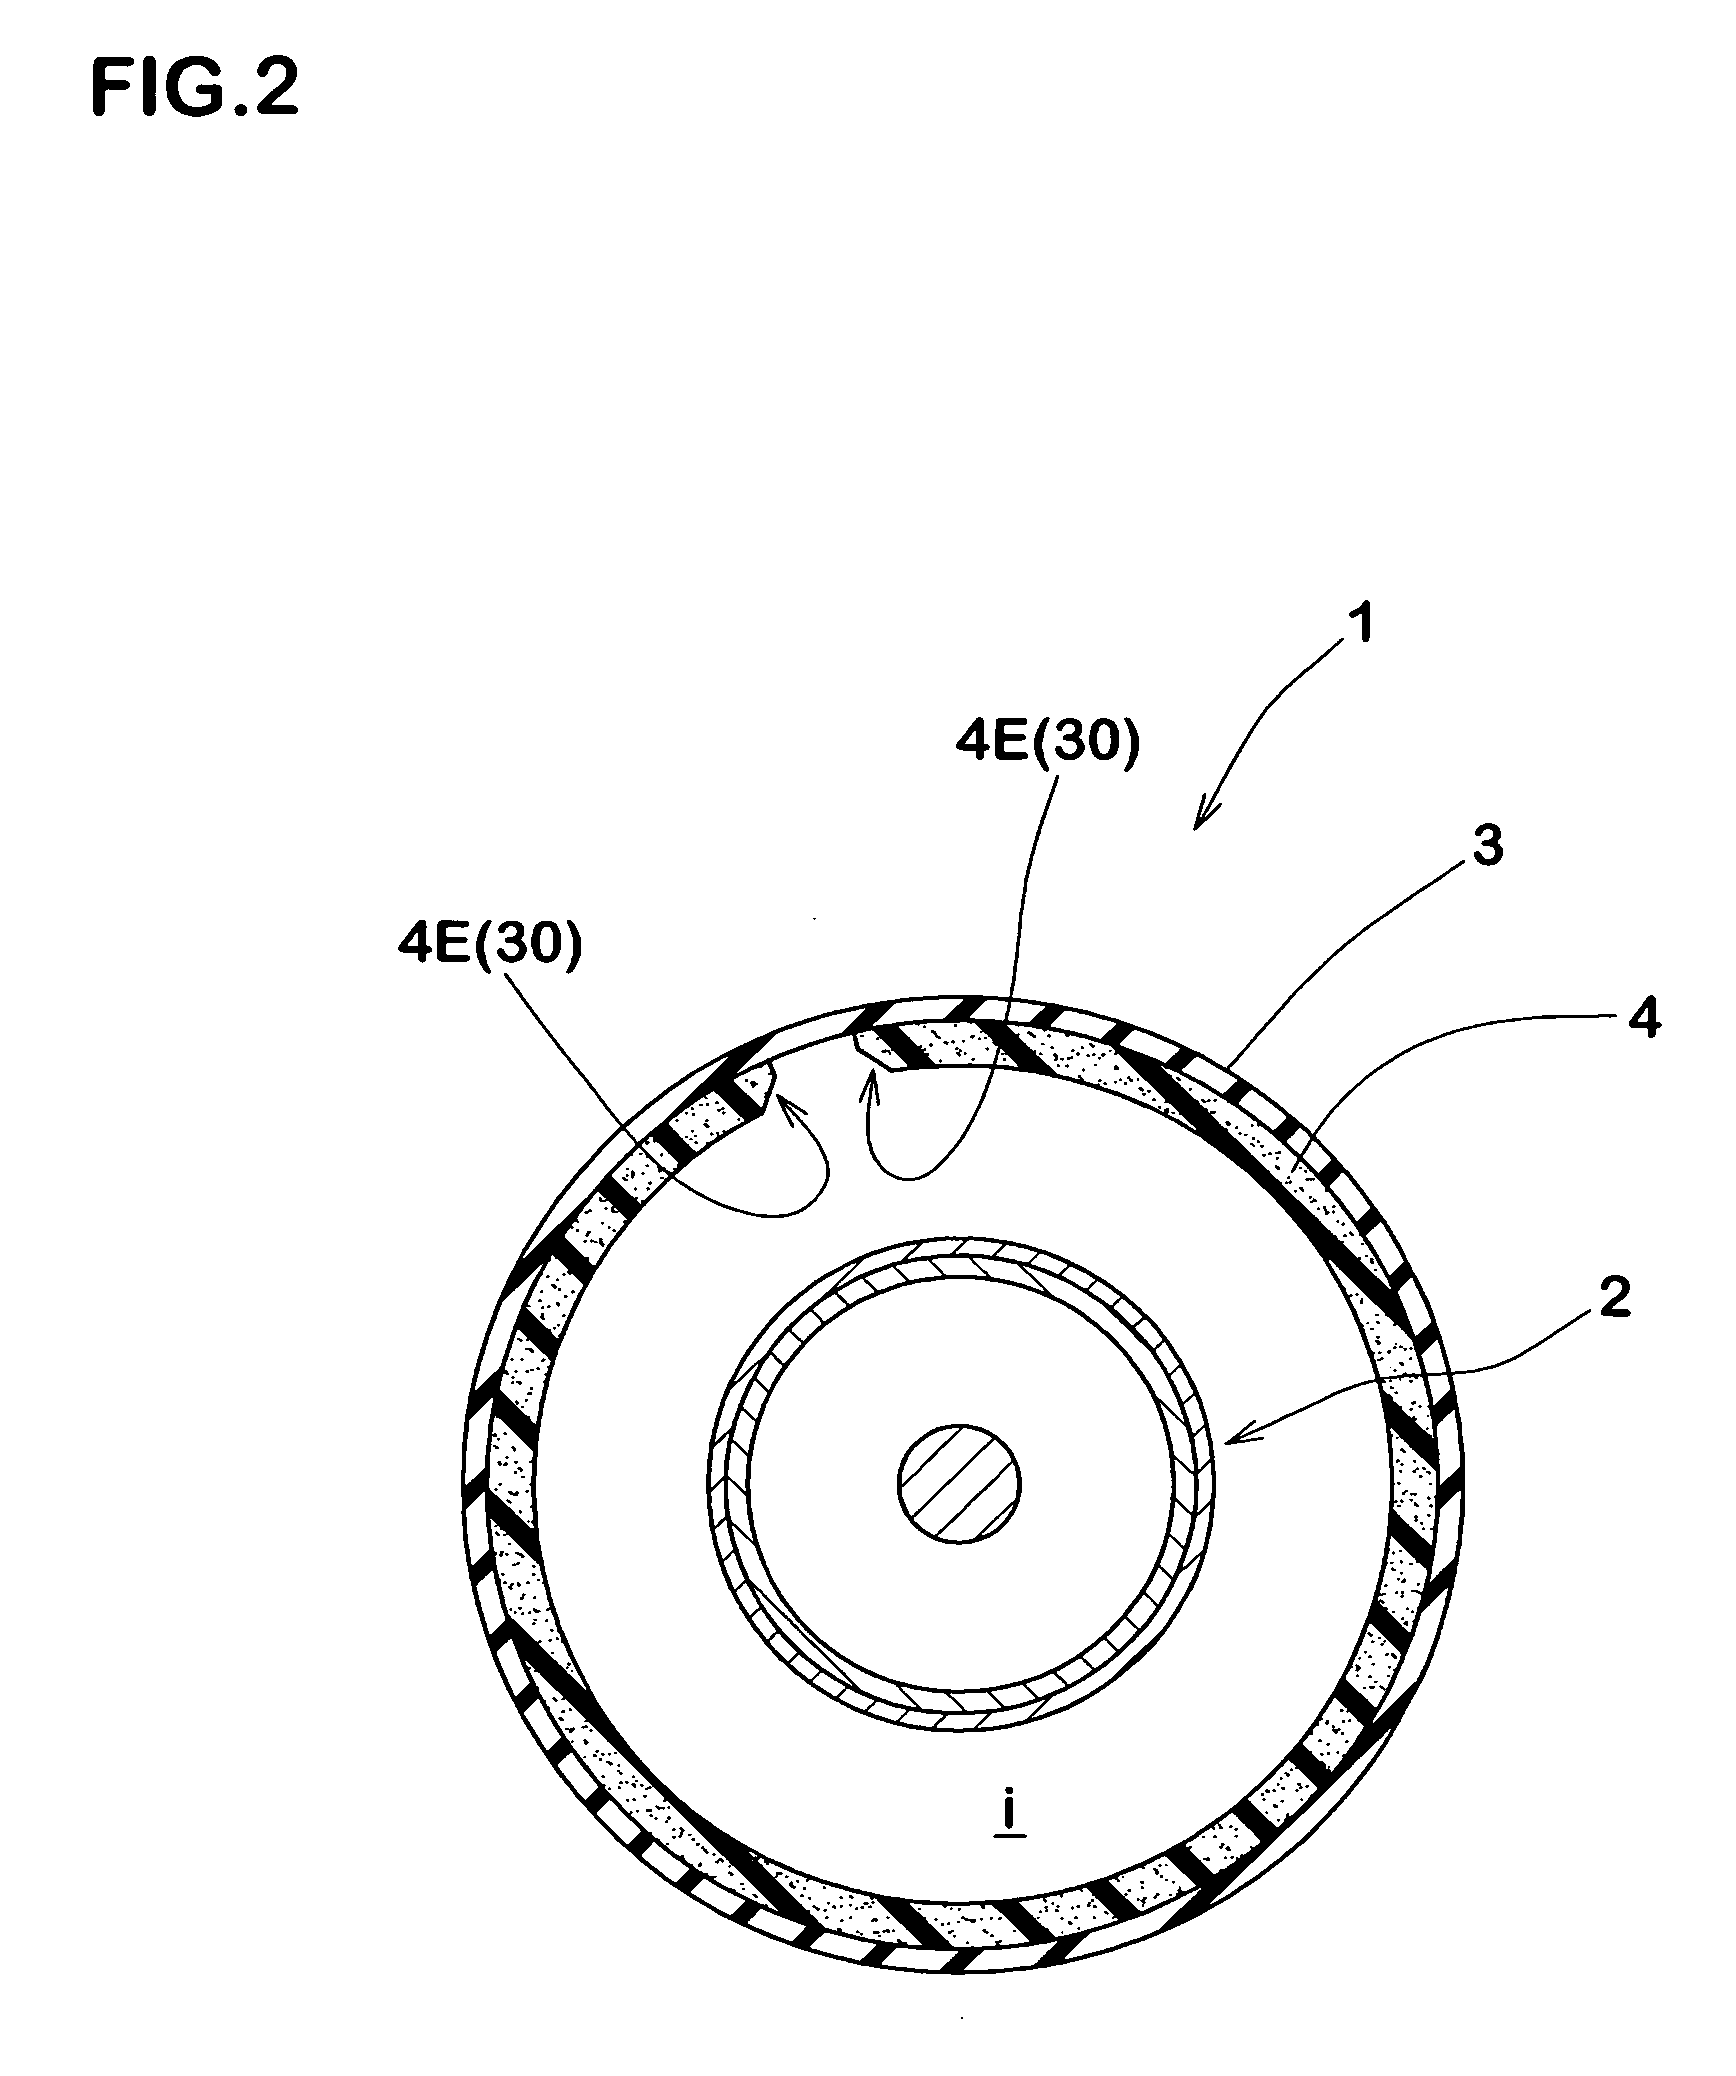 Assembly of pneumatic tire and rim